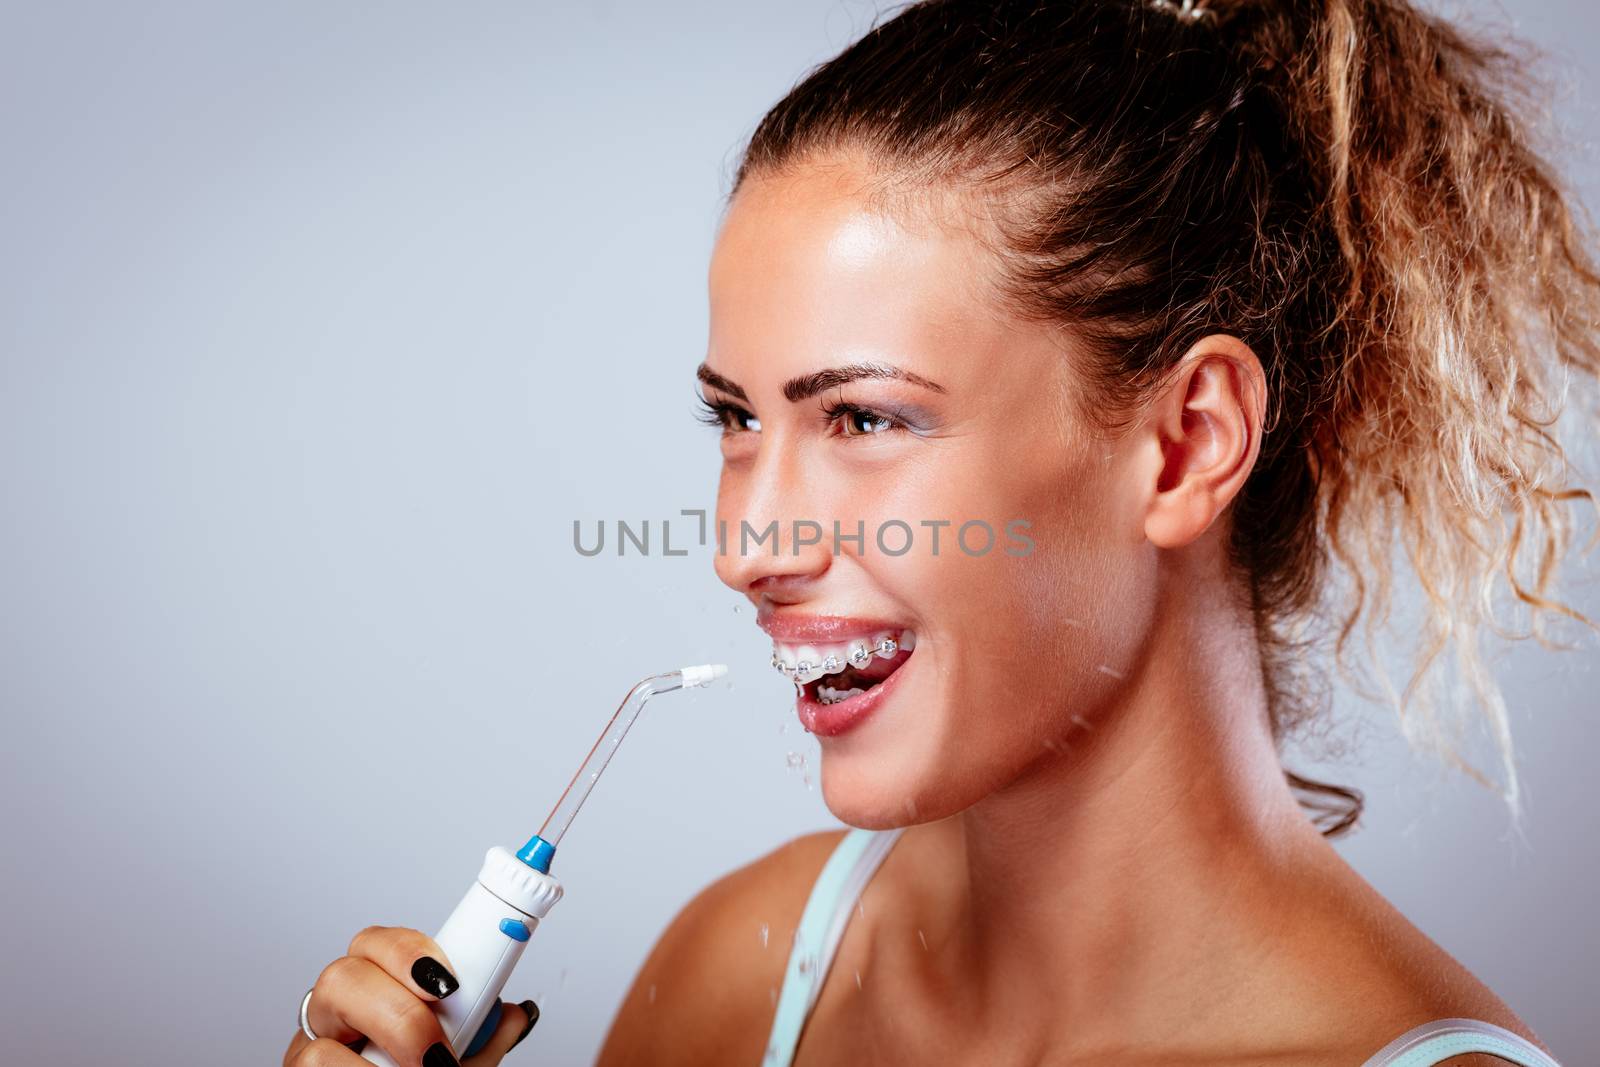 Smiling young woman with braces cleaning her teeth with oral irrigator.